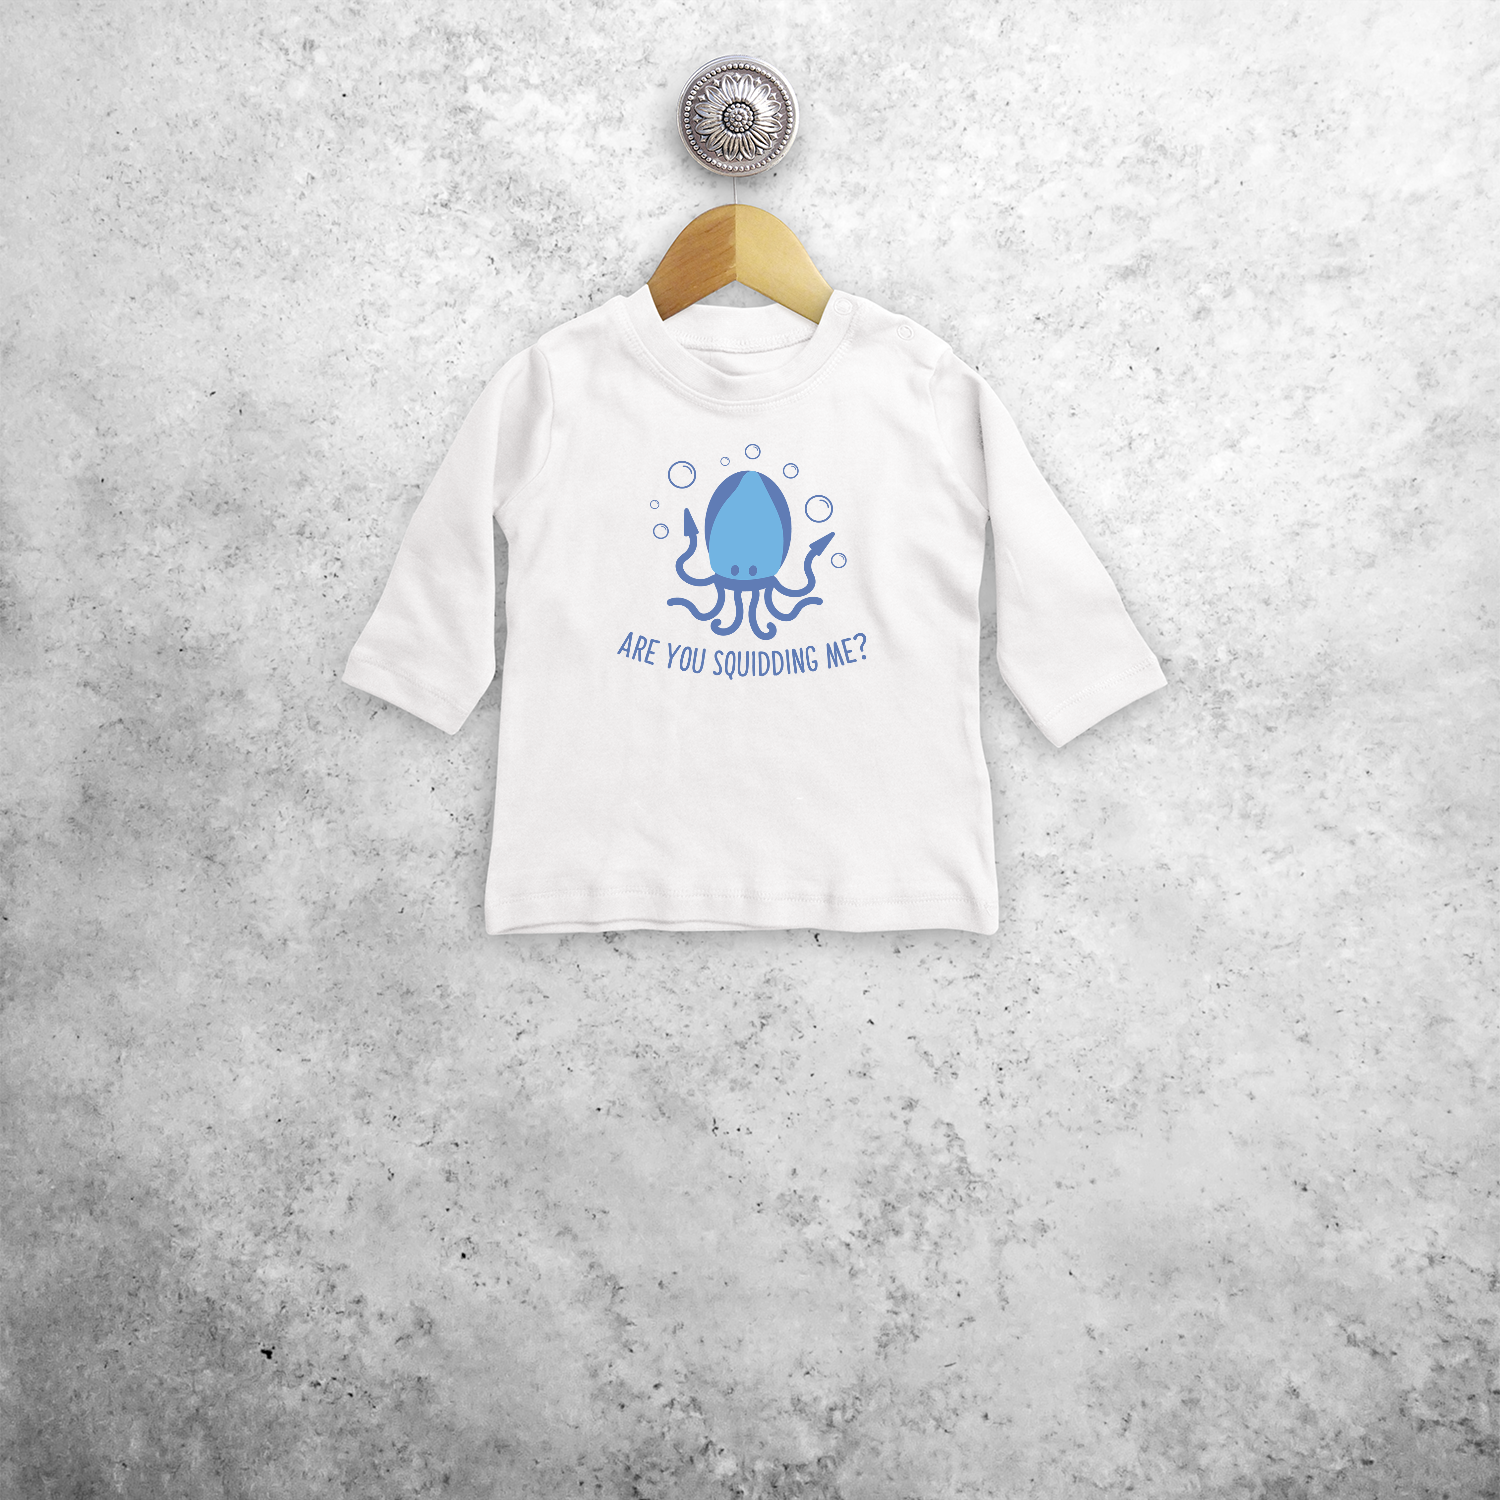 'Are you squidding me?' baby longsleeve shirt